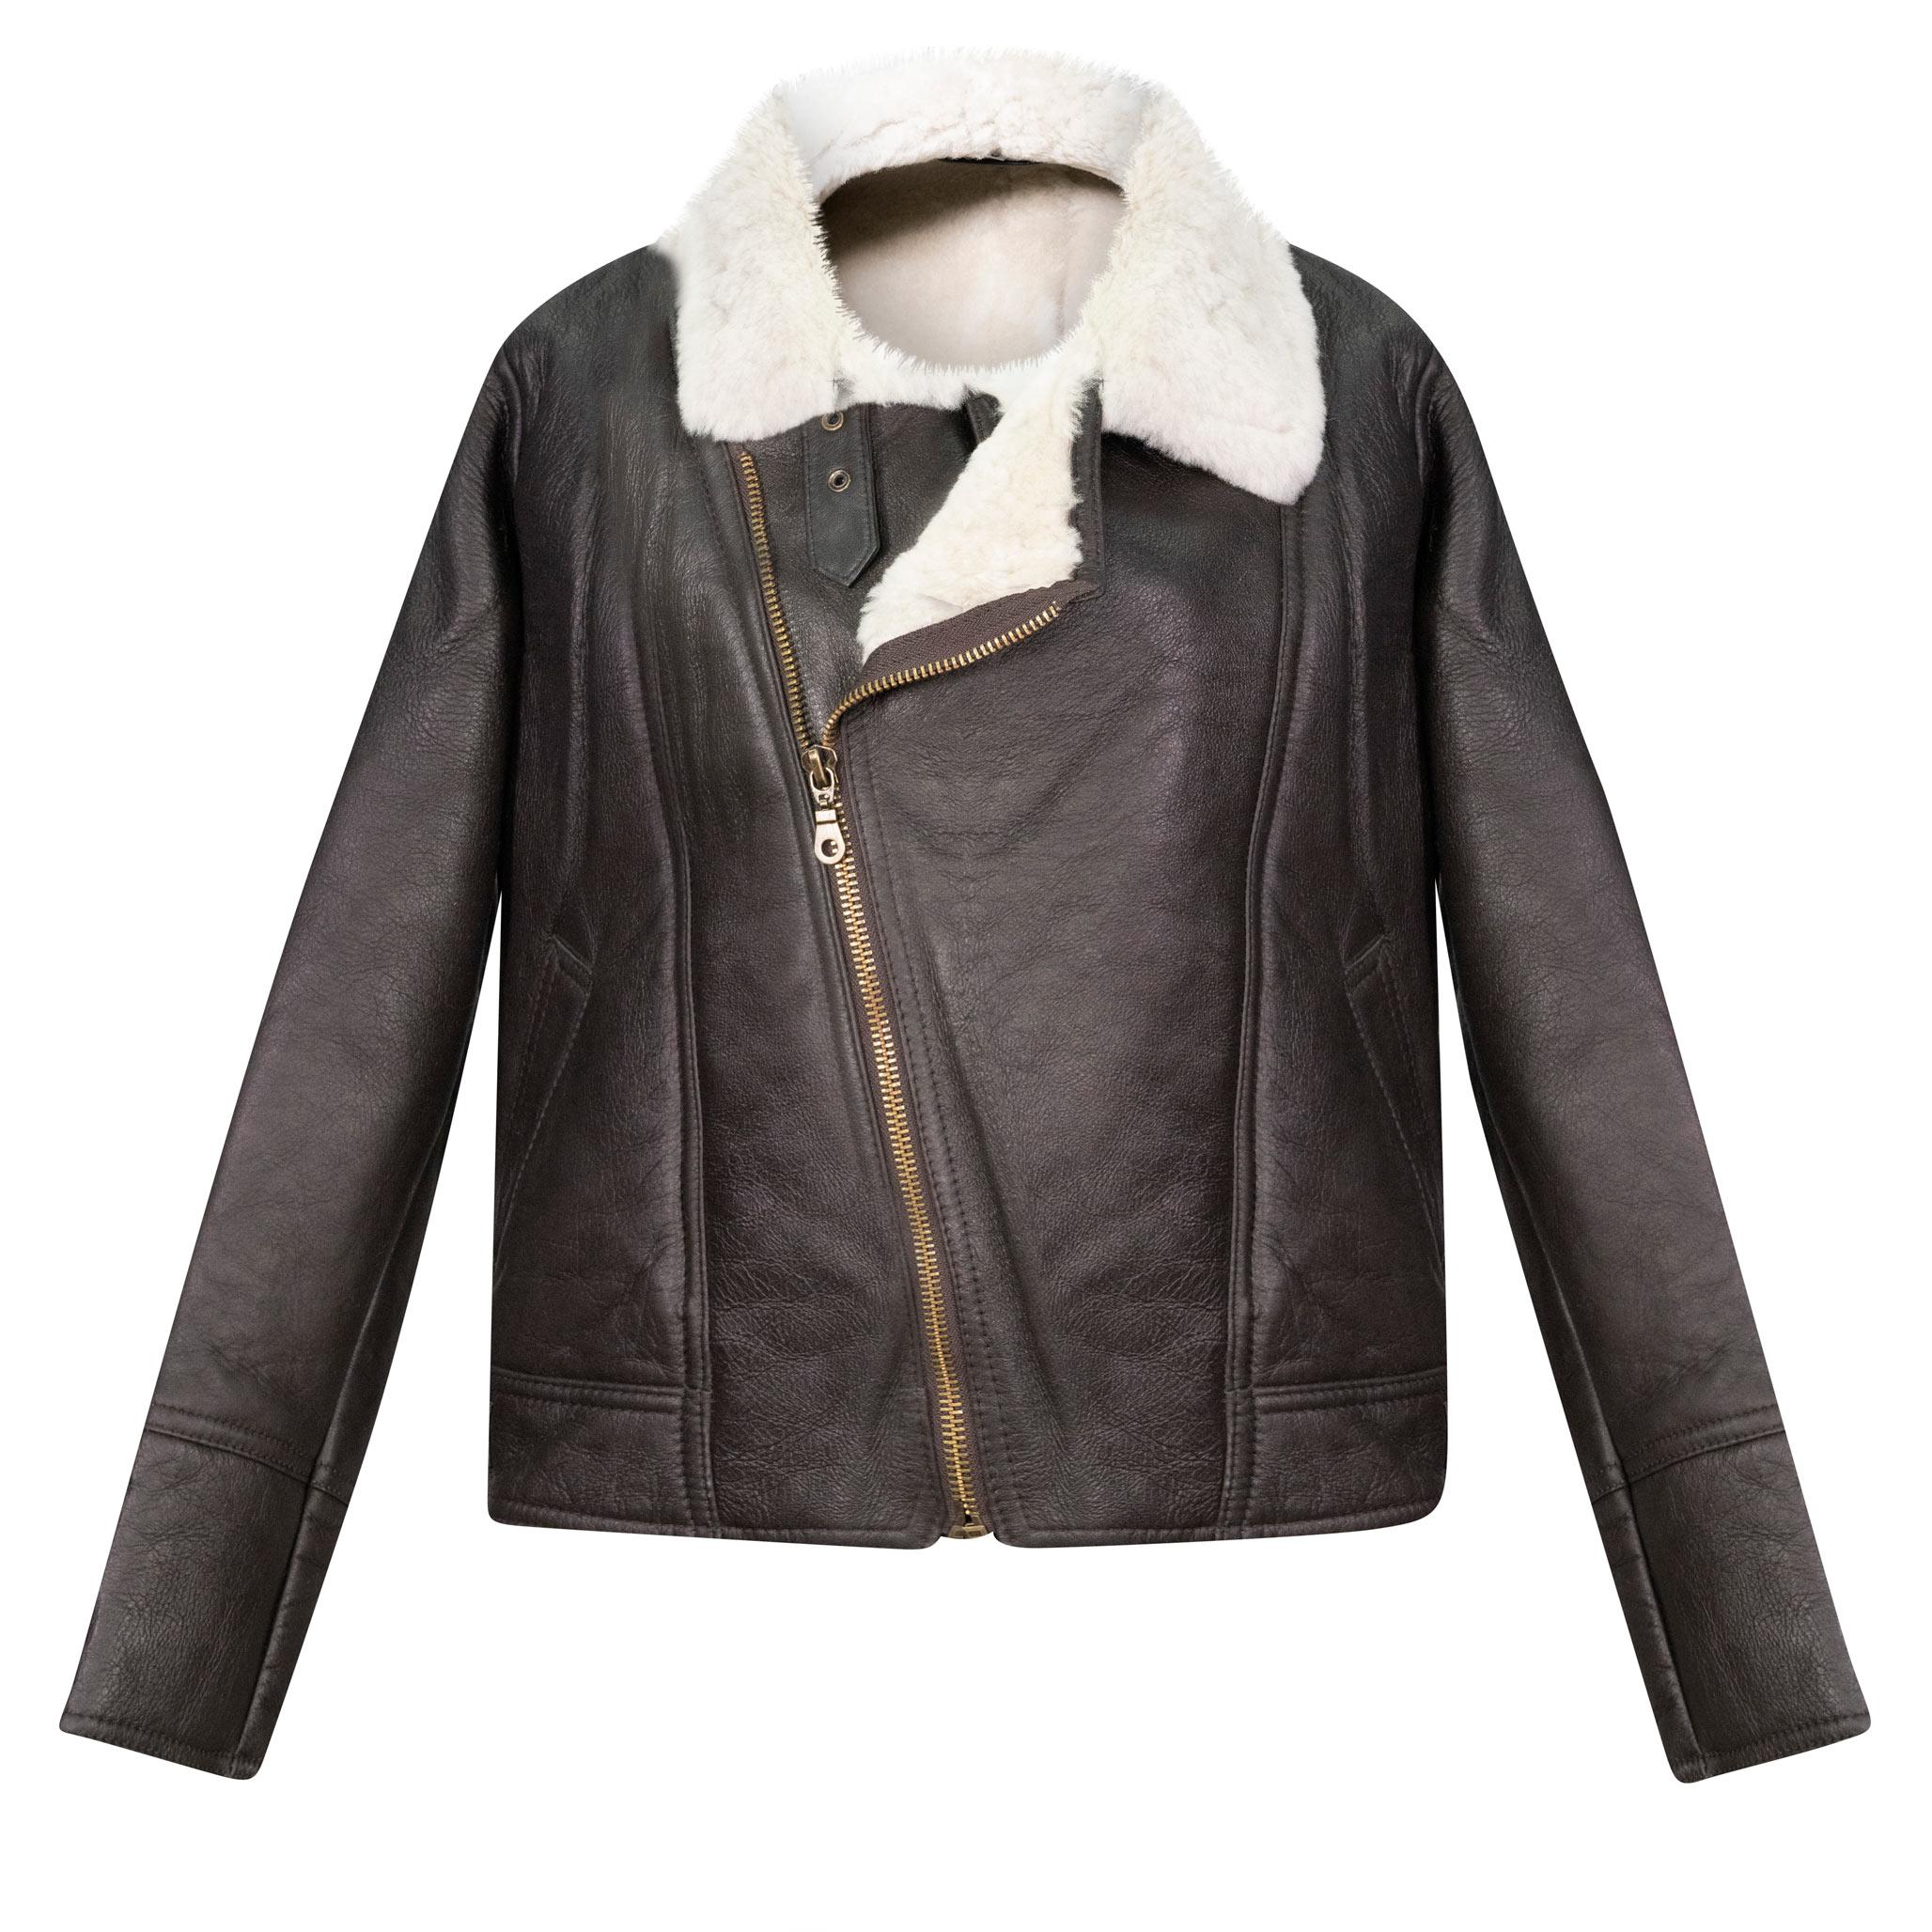 A dark brown sheepskin jacket with a trendy asymmetrical front zip fastening. Short in length, with thick cream inner fur.